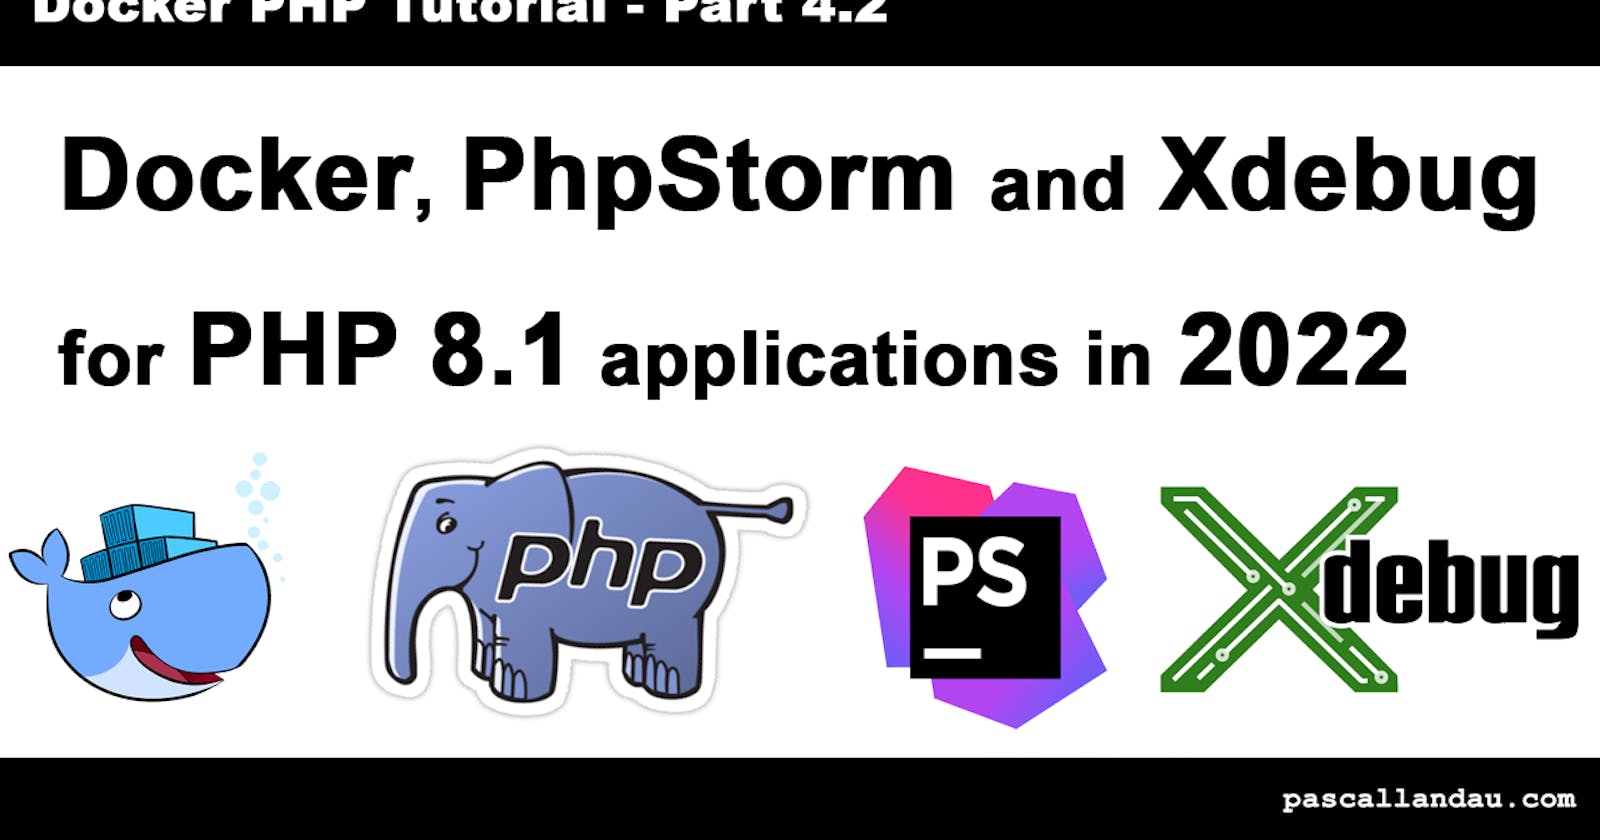 PhpStorm, Docker and Xdebug 3 on PHP 8.1 in 2022 [Tutorial Part 3]